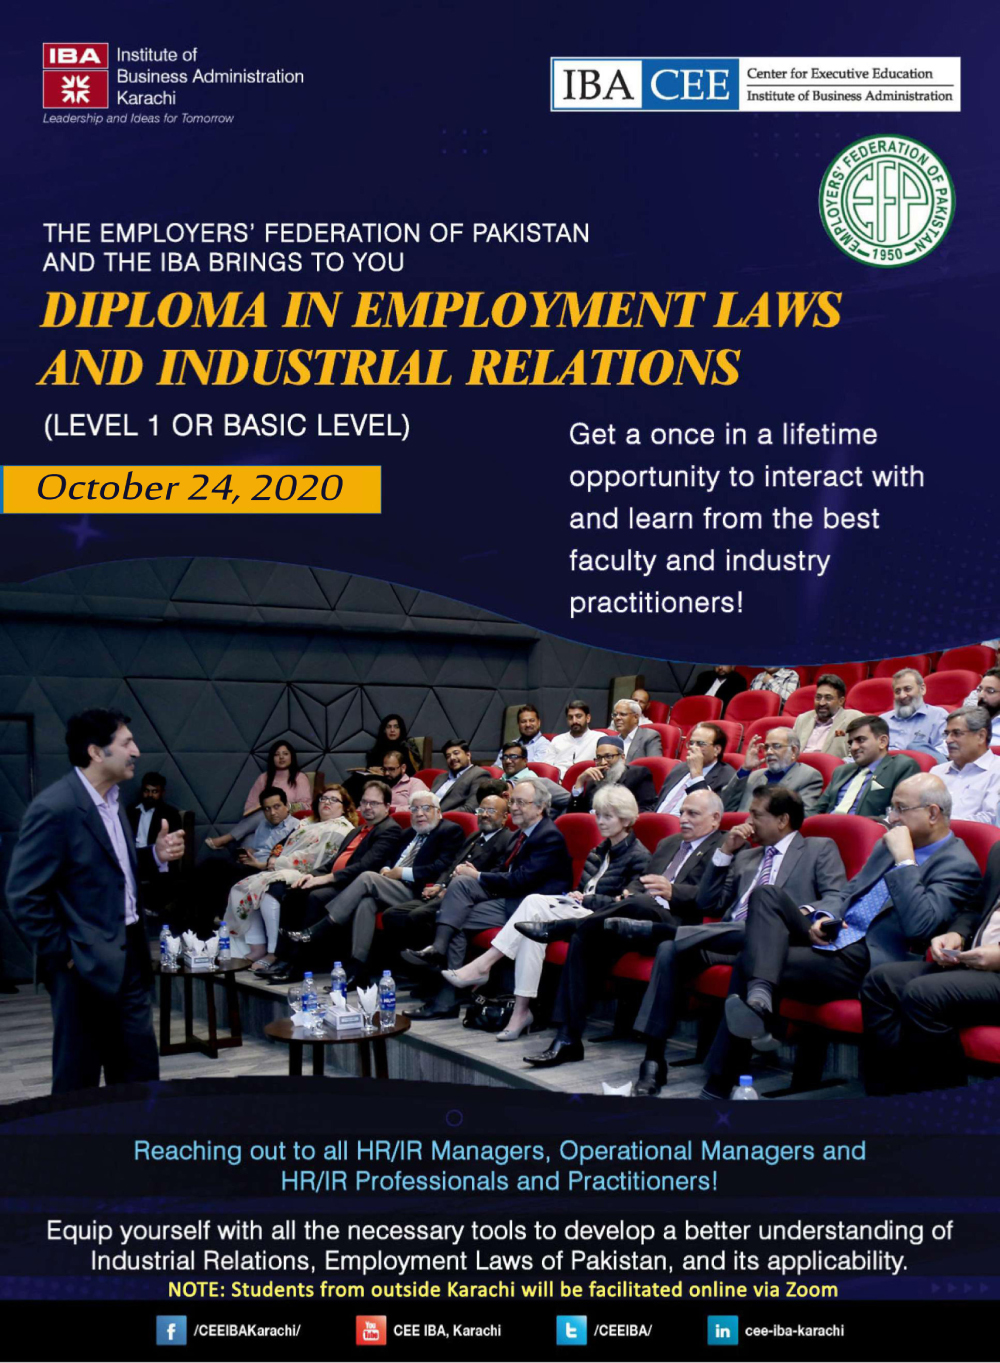 Diploma in Employment Laws and Industrial Relations